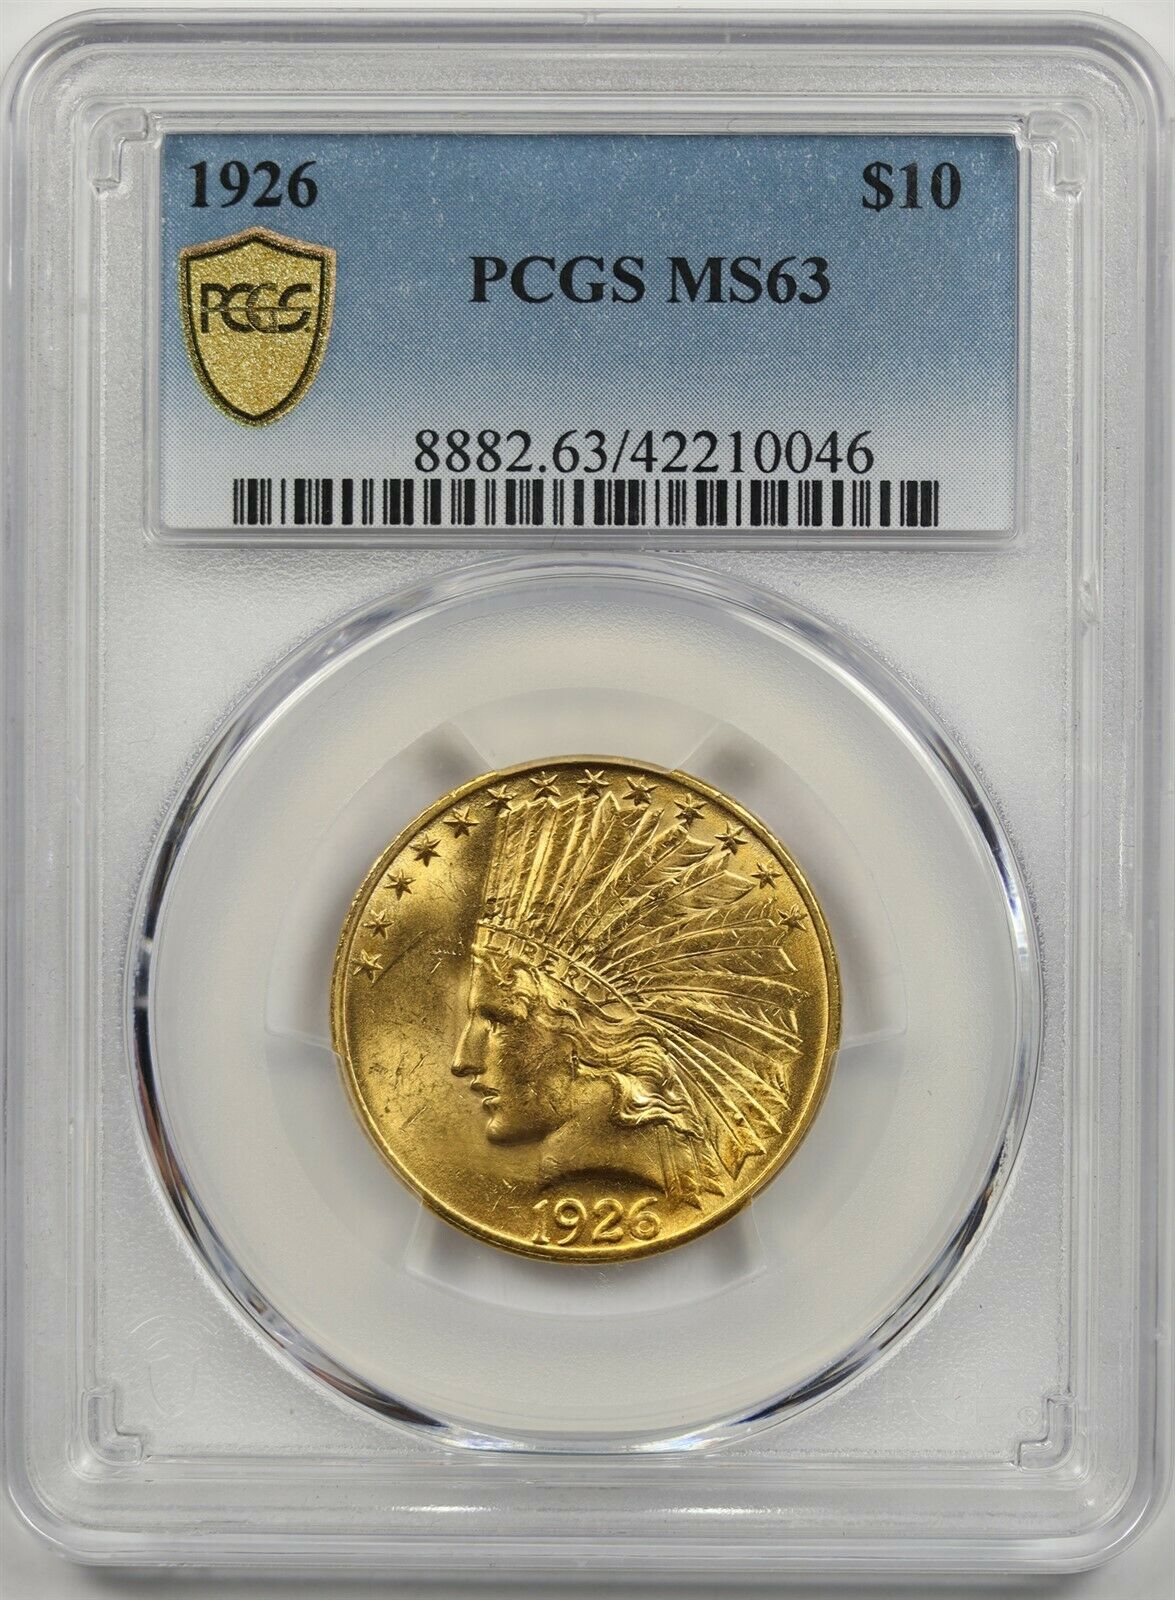 1926 $10 Pcgs Gold Shield Ms 63 Indian Head Gold Eagle